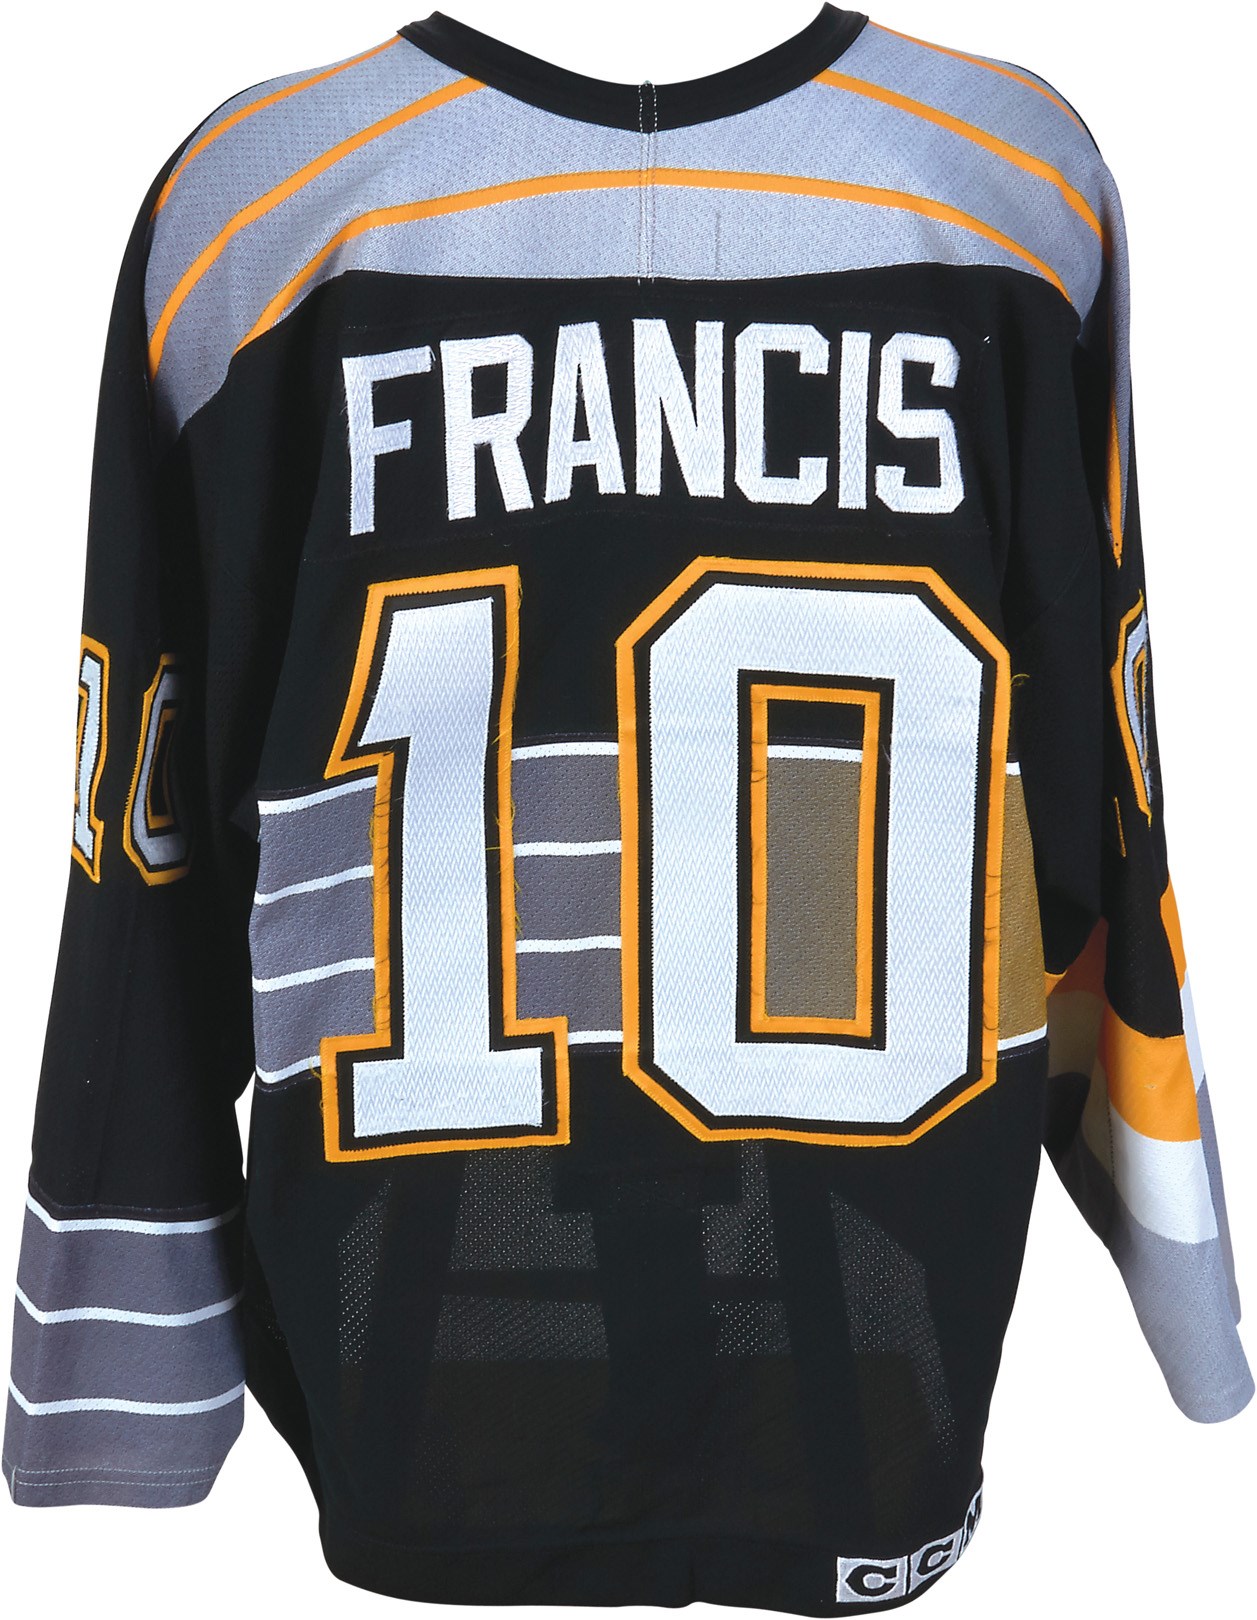 1995-96 Ron Francis Pittsburgh Penguins Game Worn Jersey (Photo-Matched)